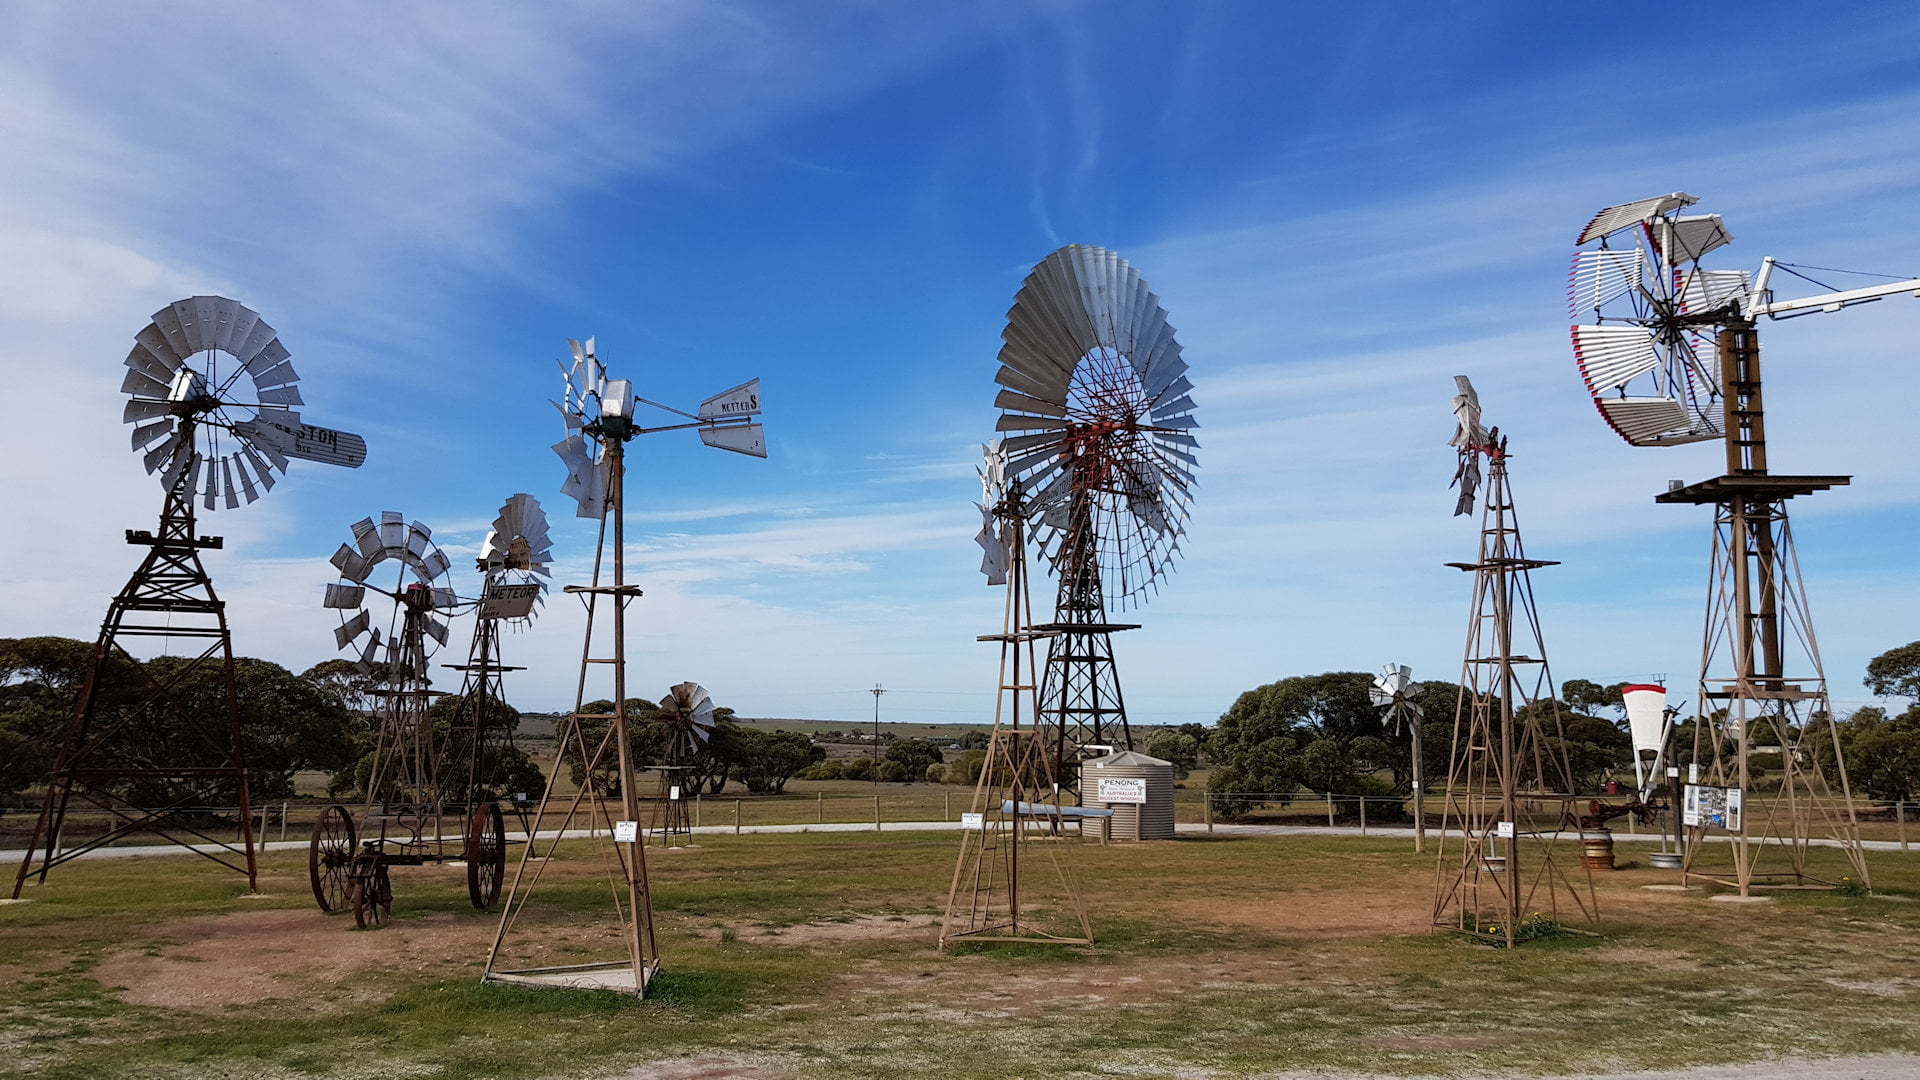 Collection of windmills at the Windmill Museum in Penong South Australia, including the Big Windmill, Australia's biggest windmill and one of the big things